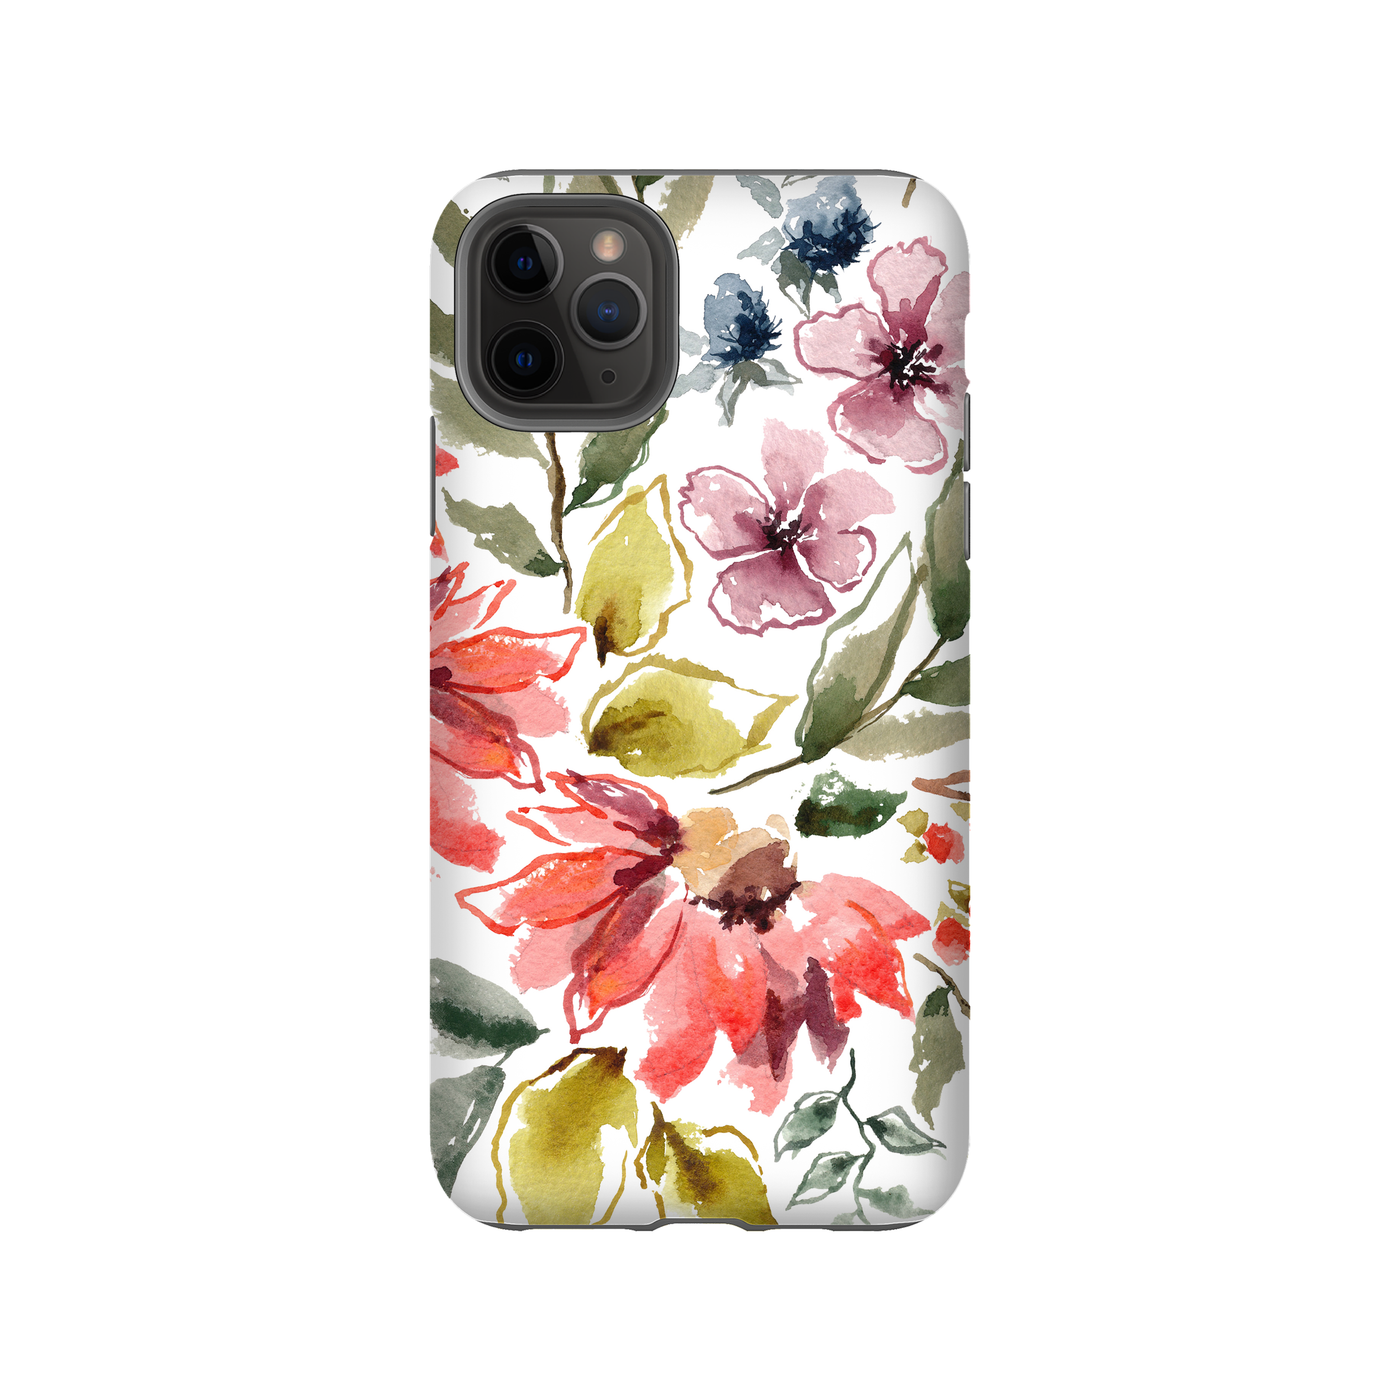 MYSTERY PHONE CASE iPhone 12 Pro